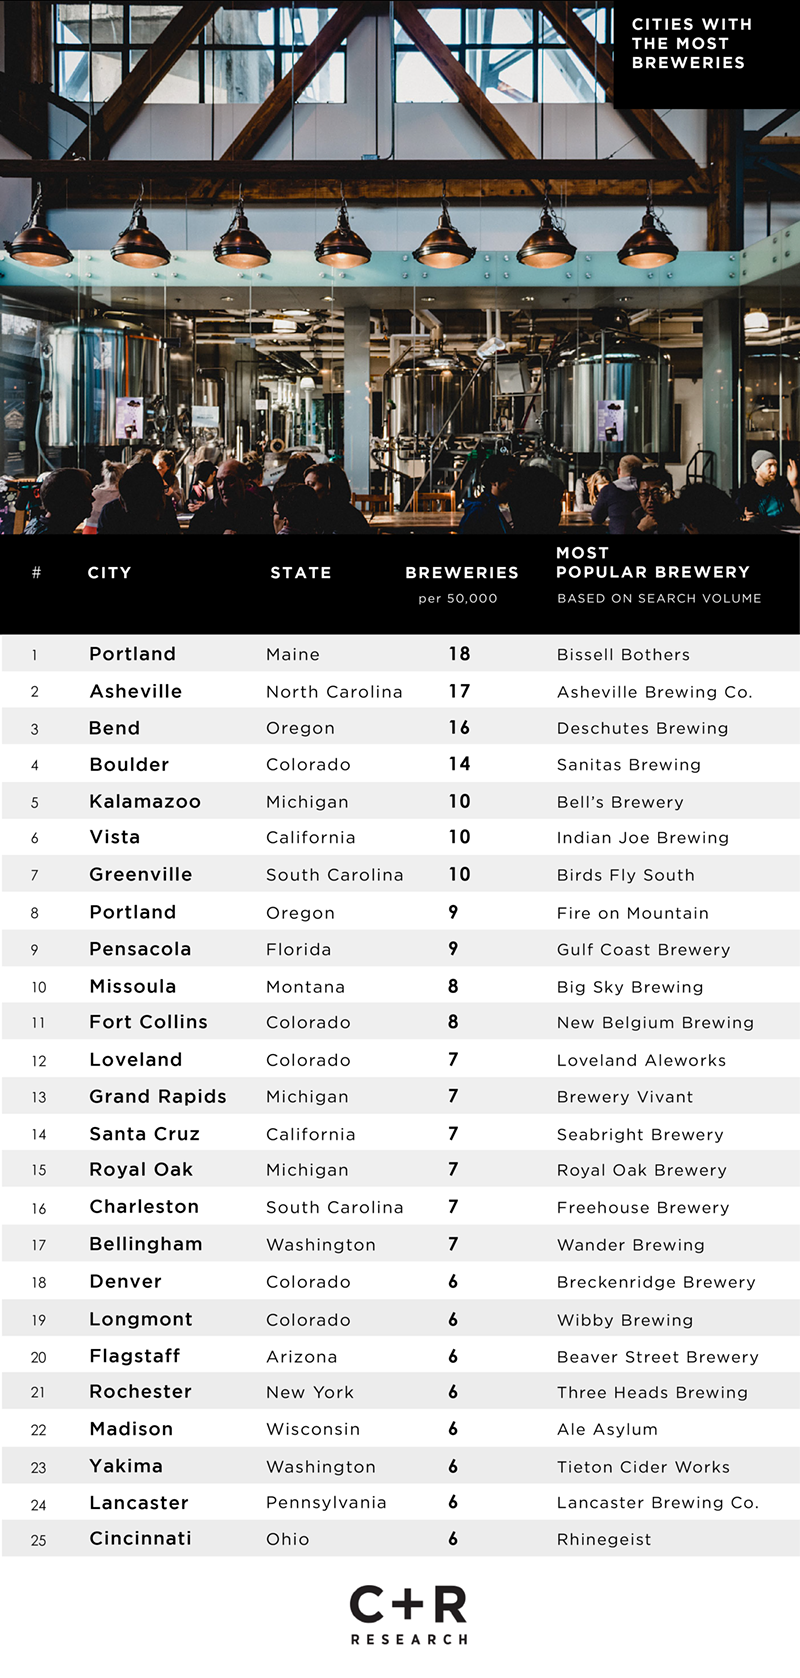 CraftBeerSurvey_most_breweries_america_revised.5d306e158bcab.png